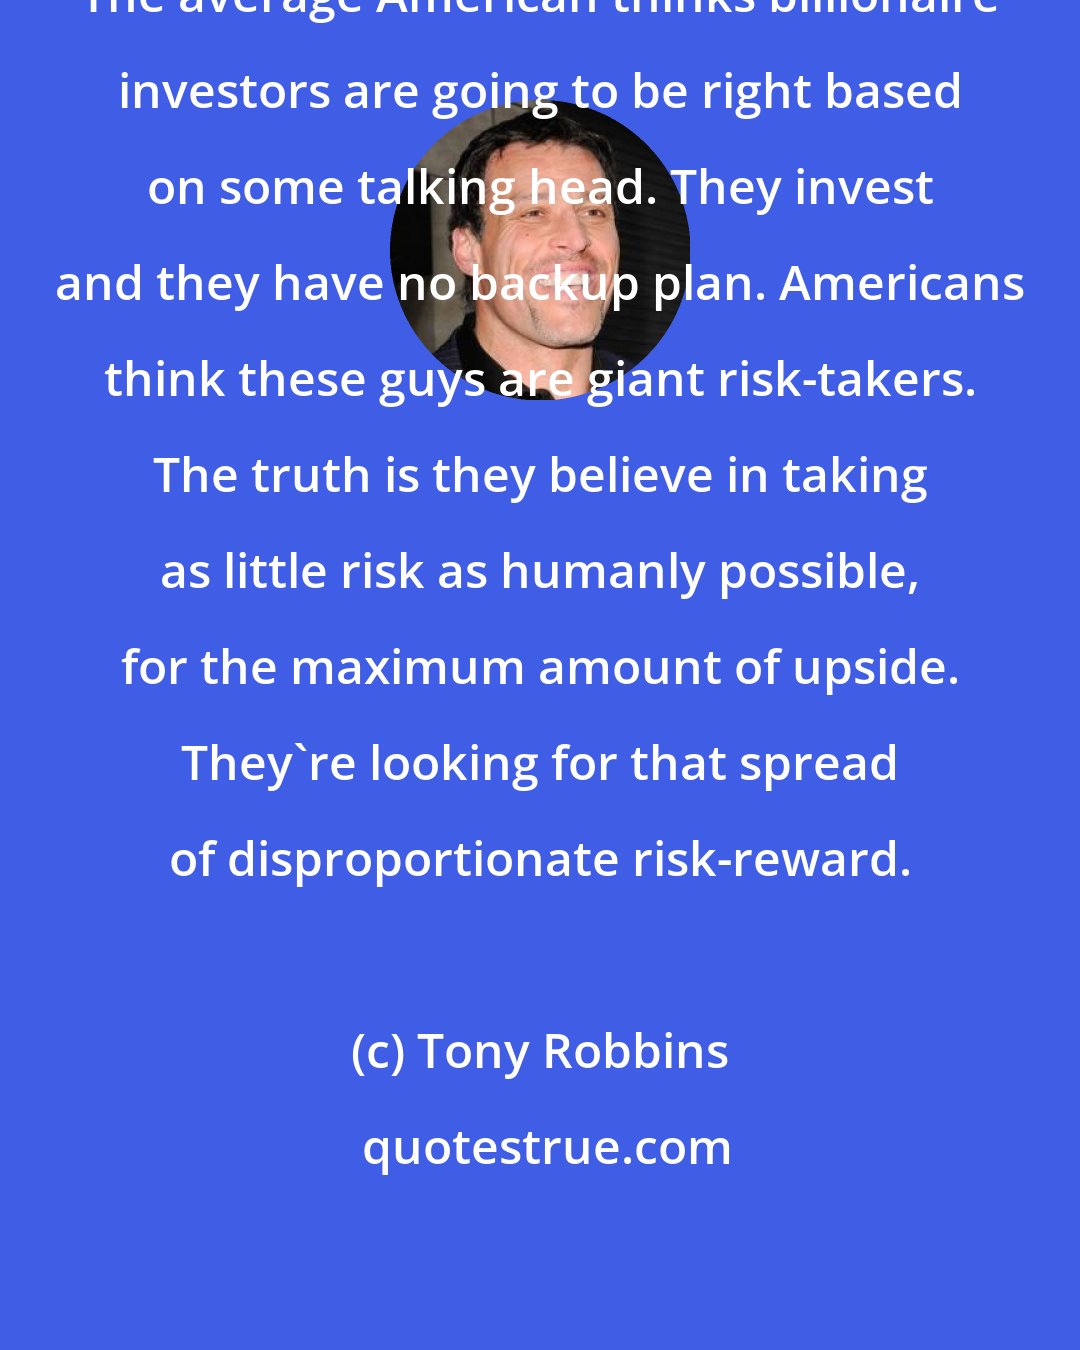 Tony Robbins: The average American thinks billionaire investors are going to be right based on some talking head. They invest and they have no backup plan. Americans think these guys are giant risk-takers. The truth is they believe in taking as little risk as humanly possible, for the maximum amount of upside. They're looking for that spread of disproportionate risk-reward.